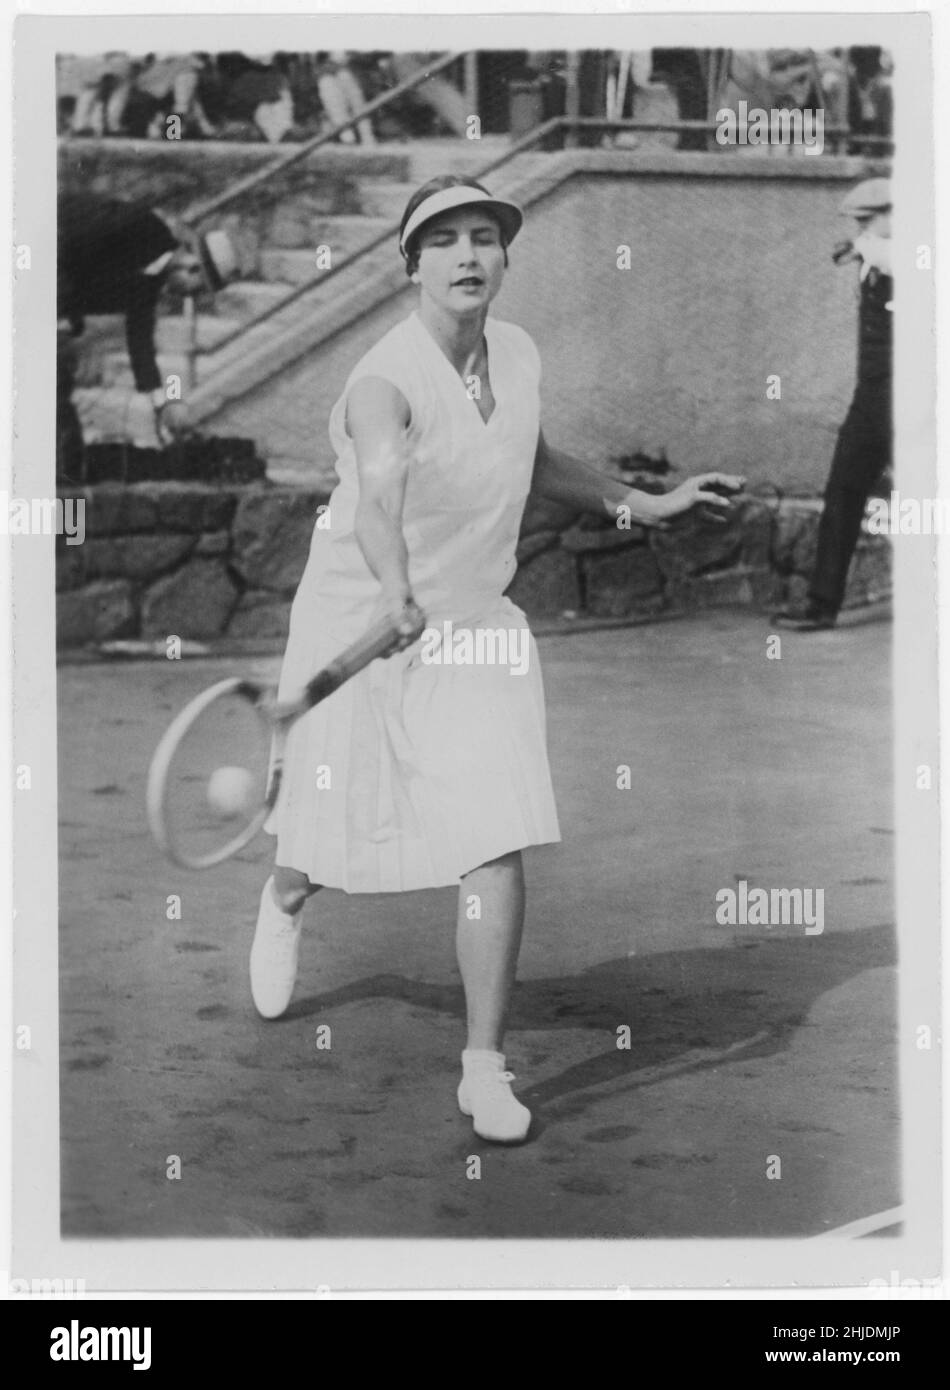 Helen Wills. American teenis player. October 6 1905 - Januari 1 1998. Also known by her married names Helen Wills Moody and Helen Wills Roark. She became famous for holding the top position in women's tennis for a total of nine years: 1927–33, 1935 and 1938. She won 31 Grand Slam tournament titles (singles, doubles, and mixed doubles) during her career, including 19 singles titles. Wills was the first American woman athlete to become a global celebrity, making friends with royalty and film stars despite her preference for staying out of the limelight. She was admired for her graceful physique Stock Photo